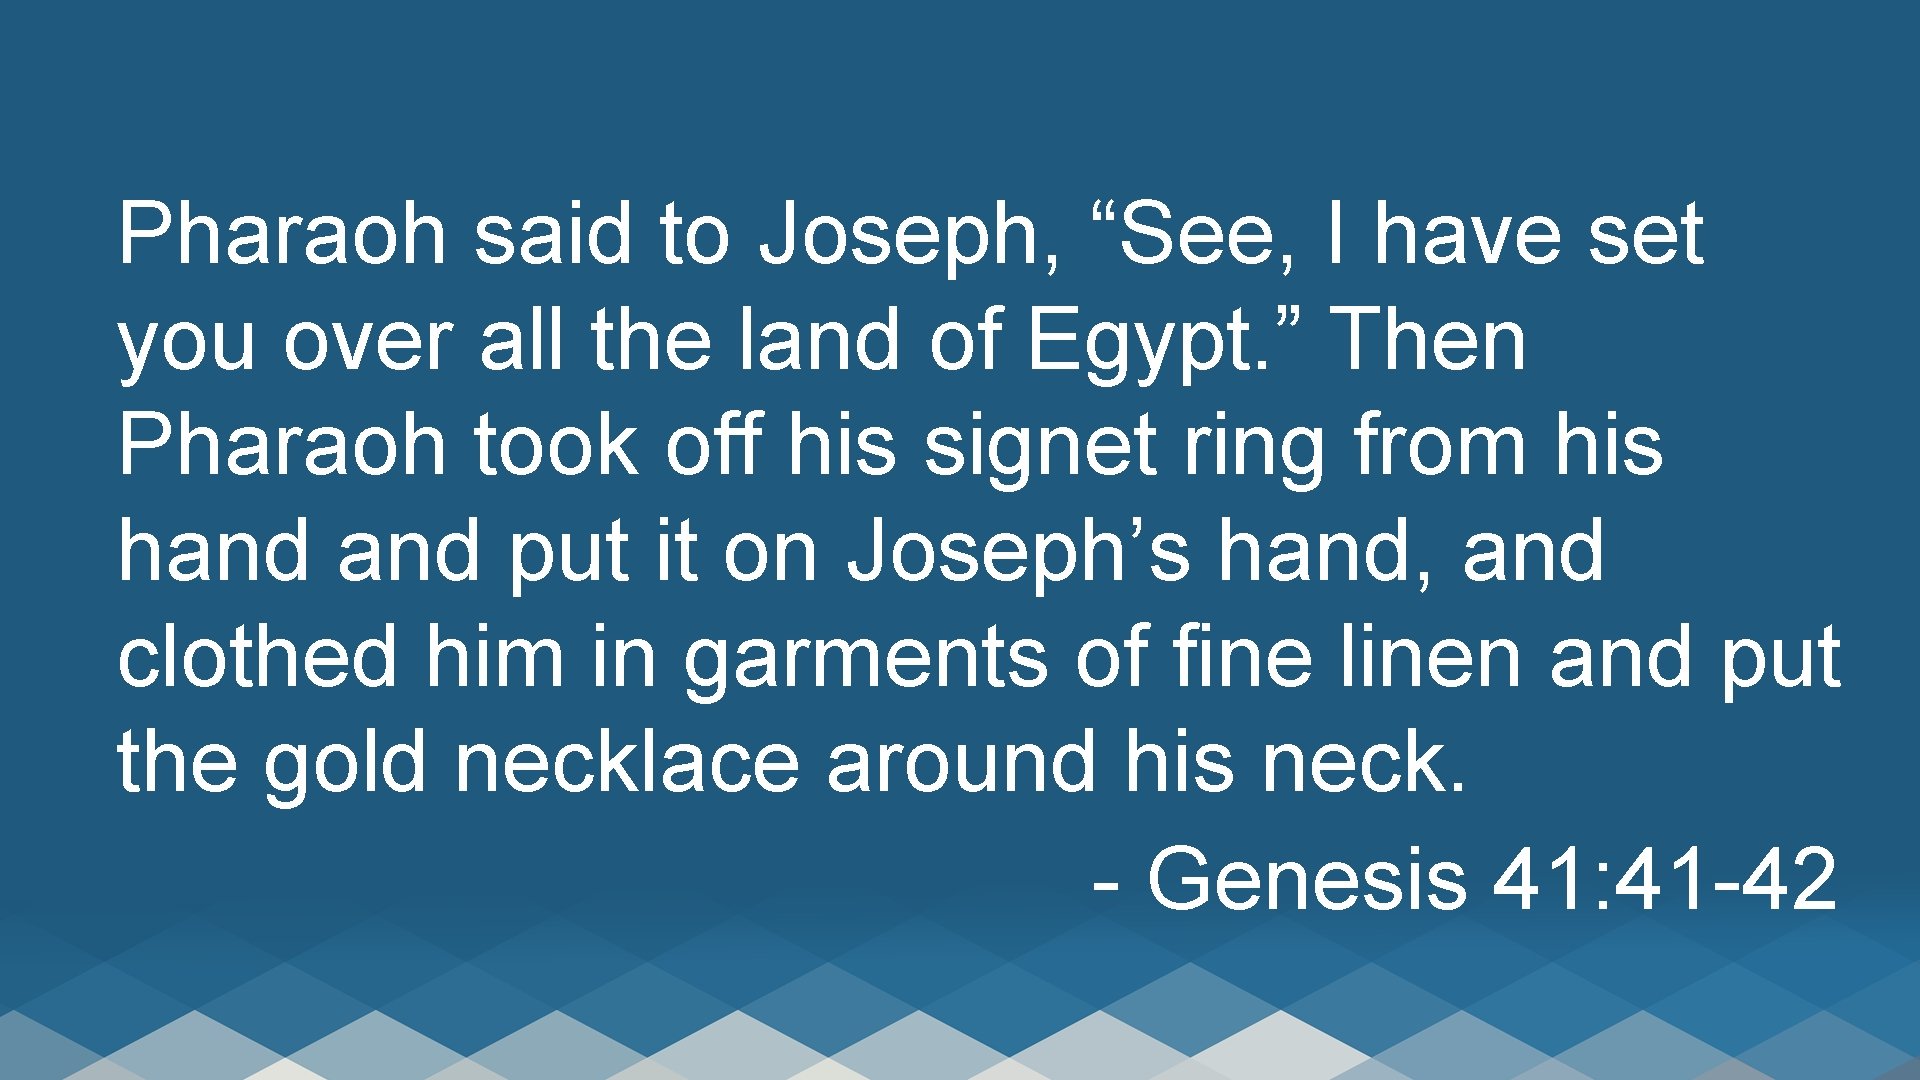 Pharaoh said to Joseph, “See, I have set you over all the land of